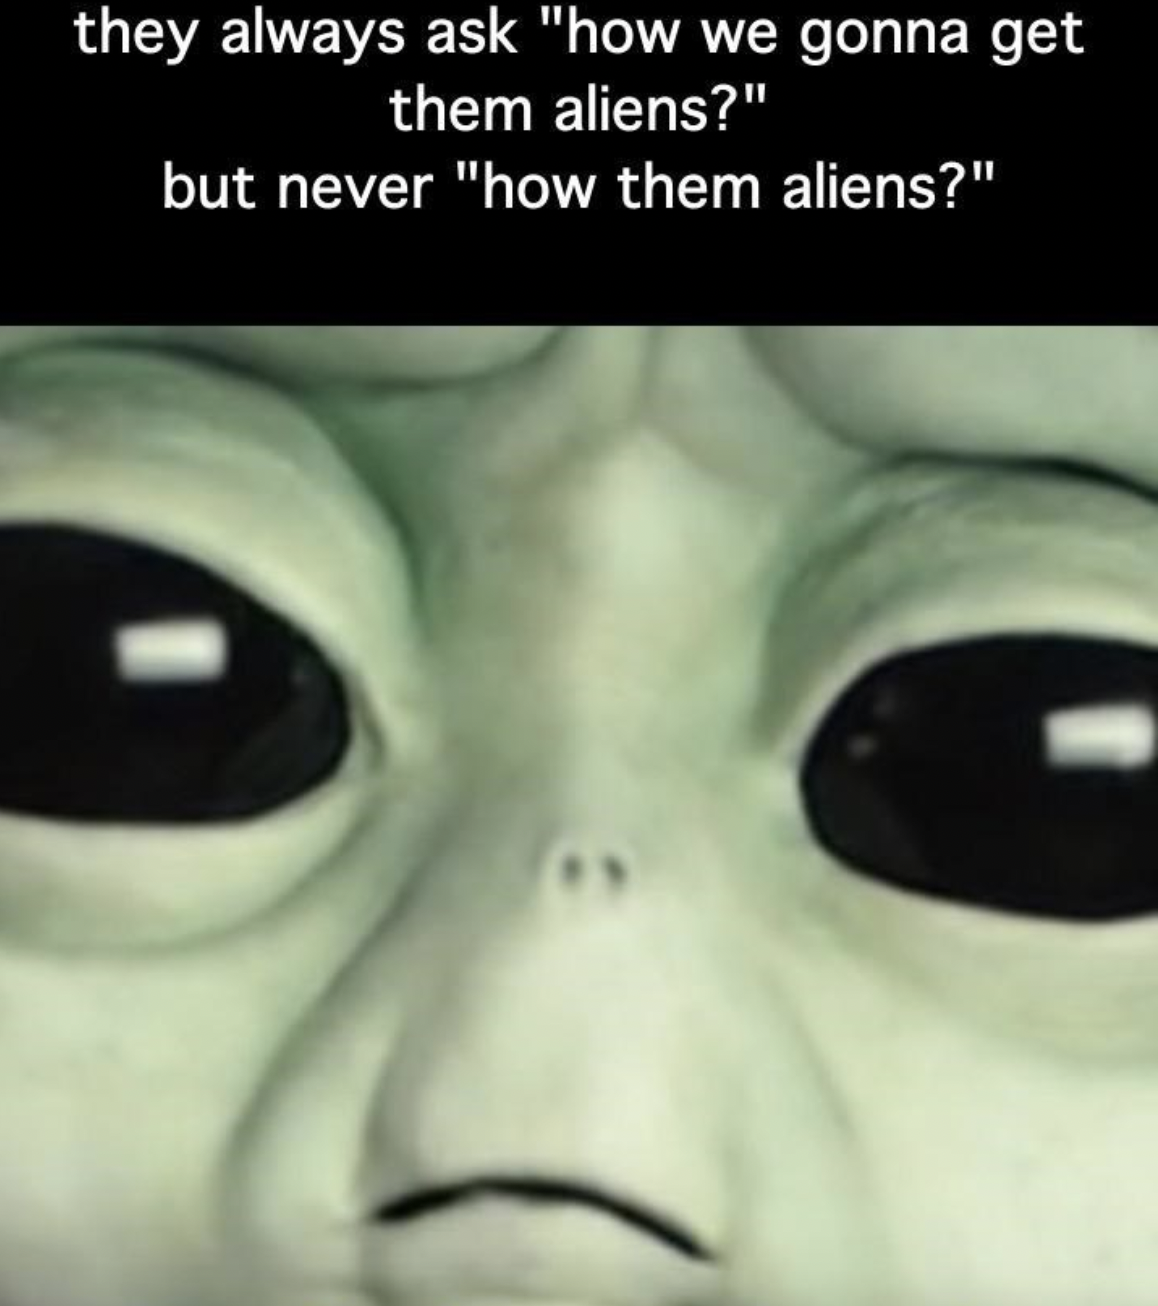 photo caption - they always ask "how we gonna get them aliens?" but never "how them aliens?"